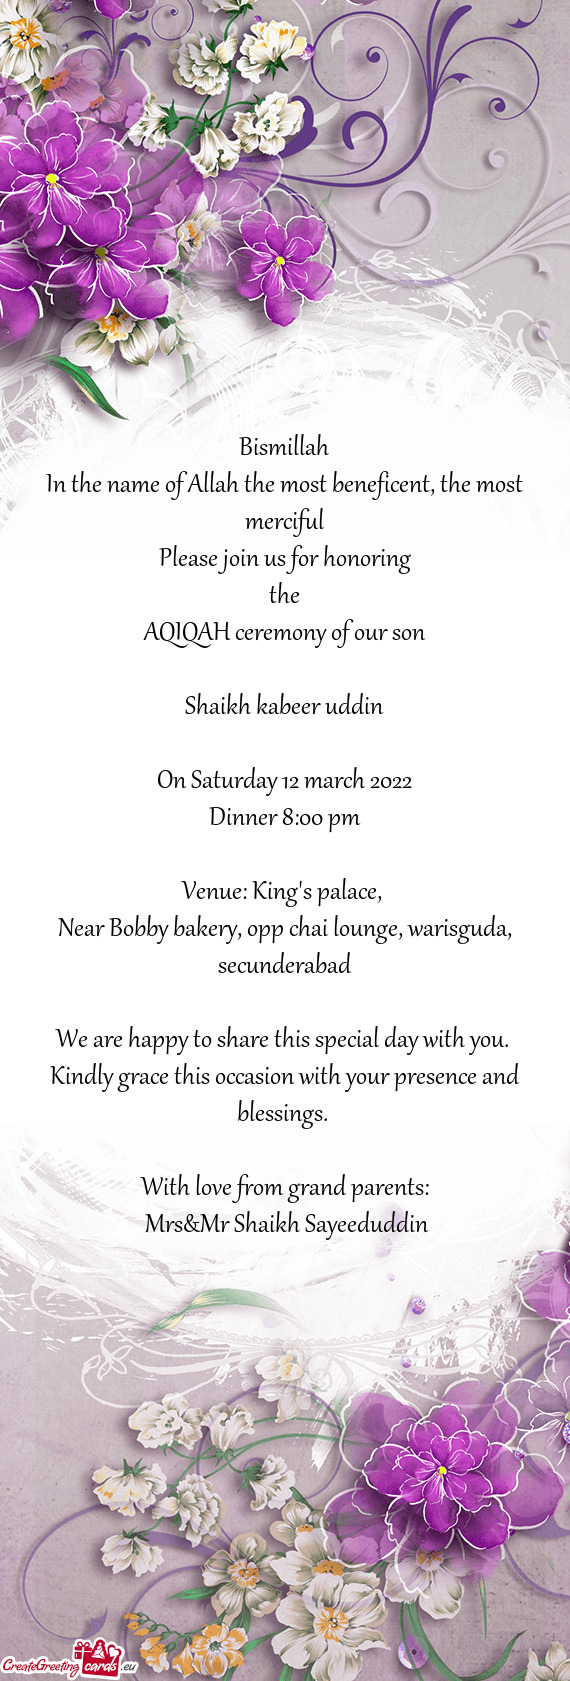 The most merciful
 Please join us for honoring
 the
 AQIQAH ceremony of our son
 
 Shaikh kabeer ud